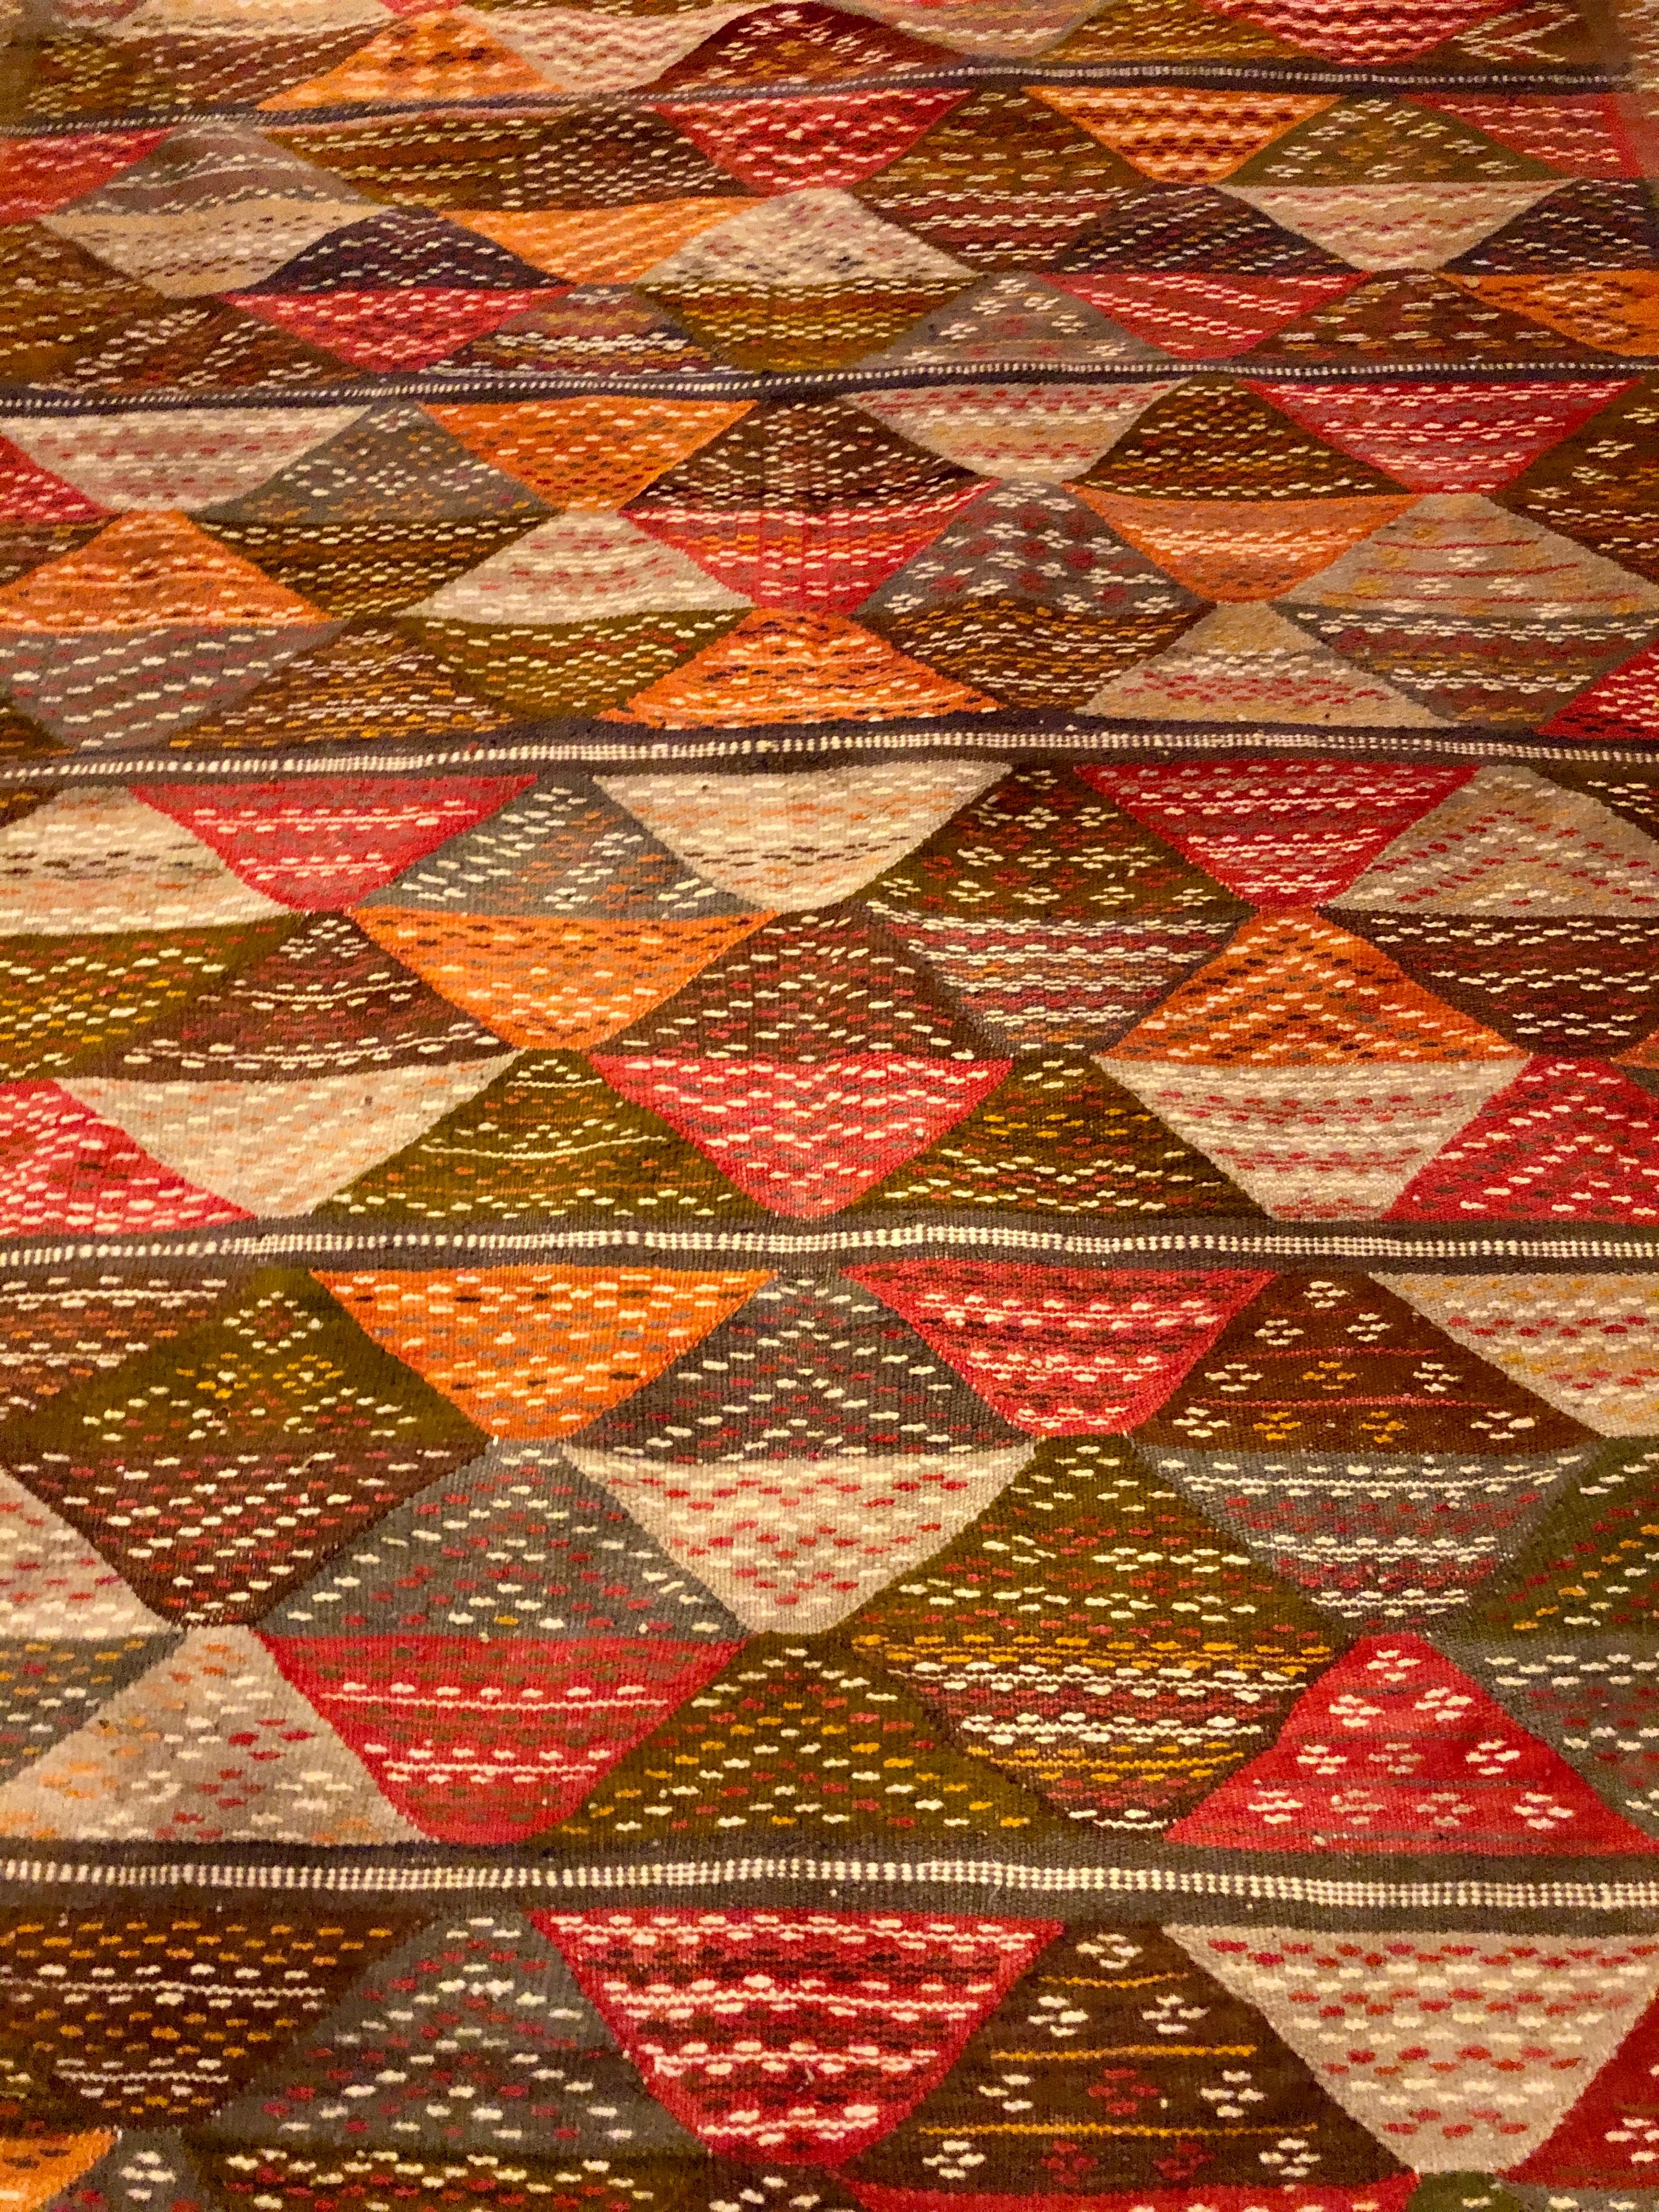 Late 20th Century Vintage Tribal Handwoven Wool and Organic Dye Rug or Carpet in Triangle Patterns